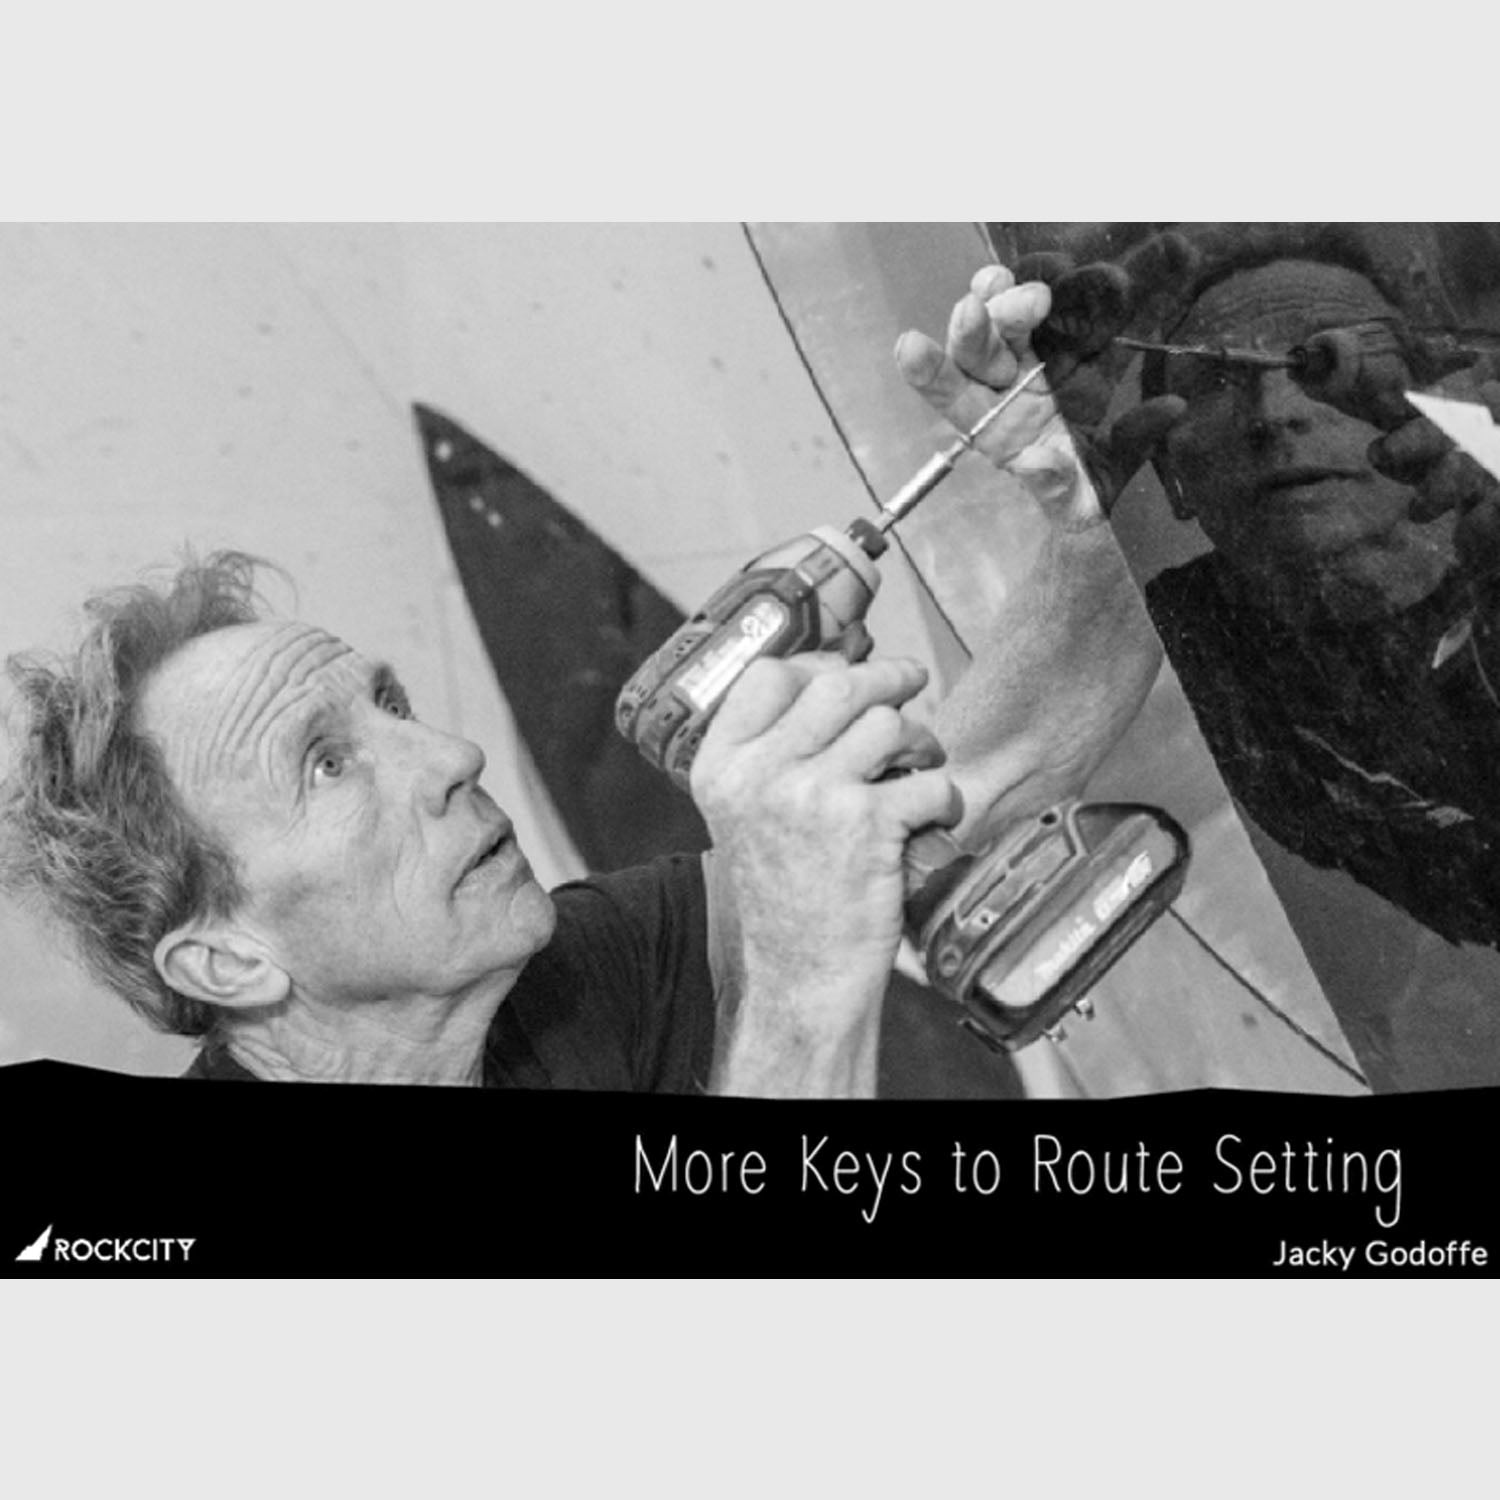 More Keys to Route Setting